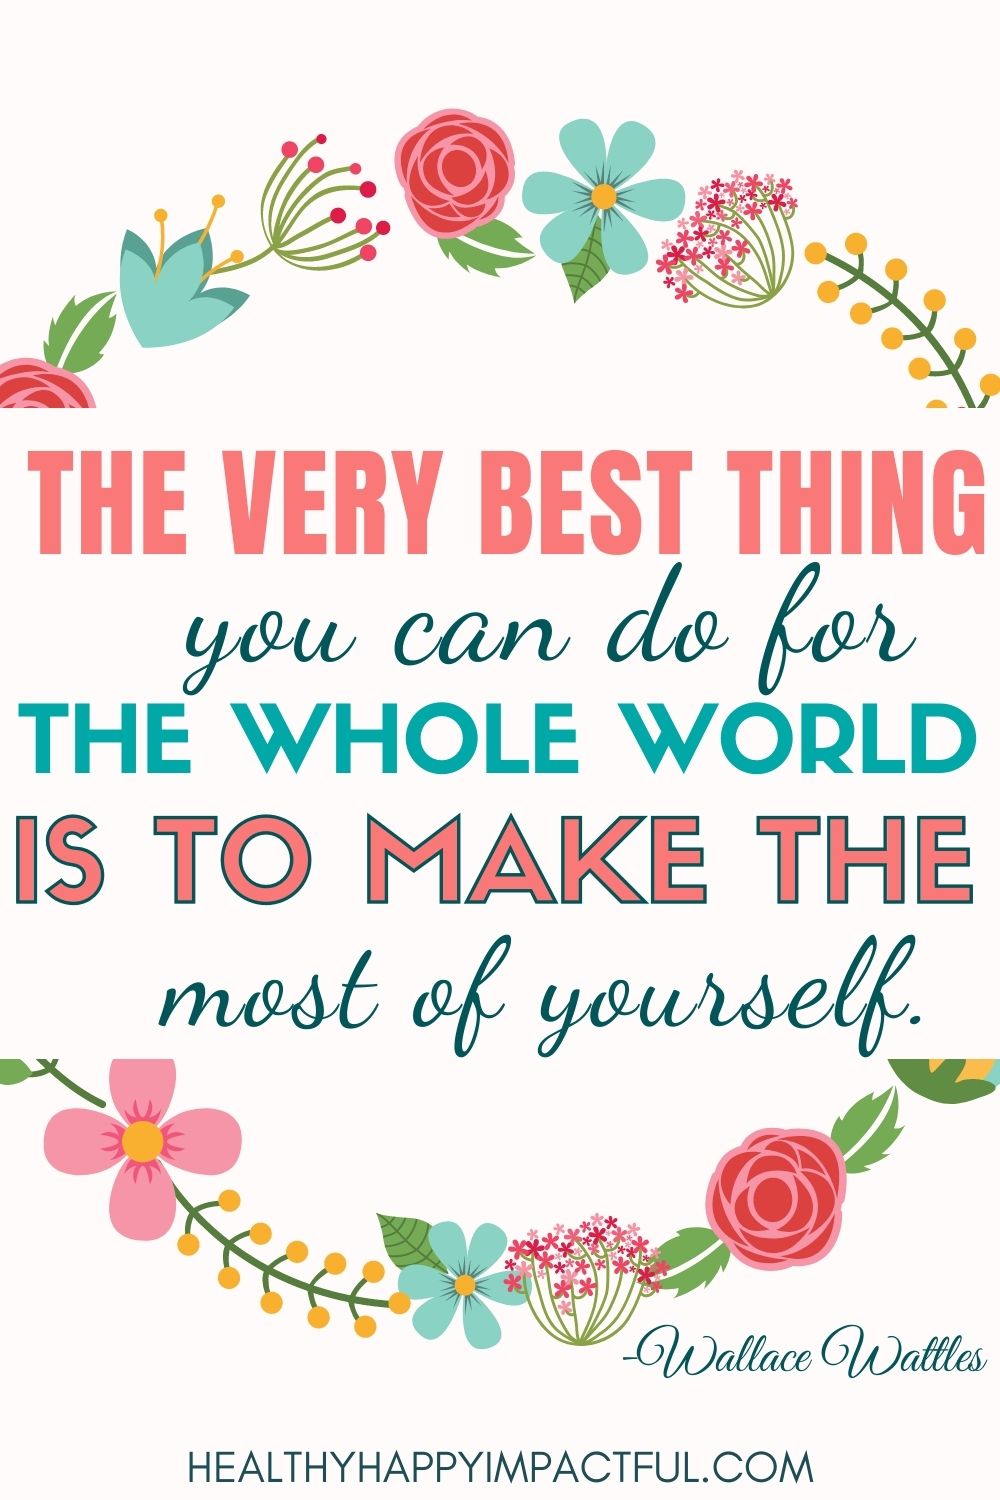 "The best thing you can do for the whole world is to make the most of yourself." - Wallace Wattles